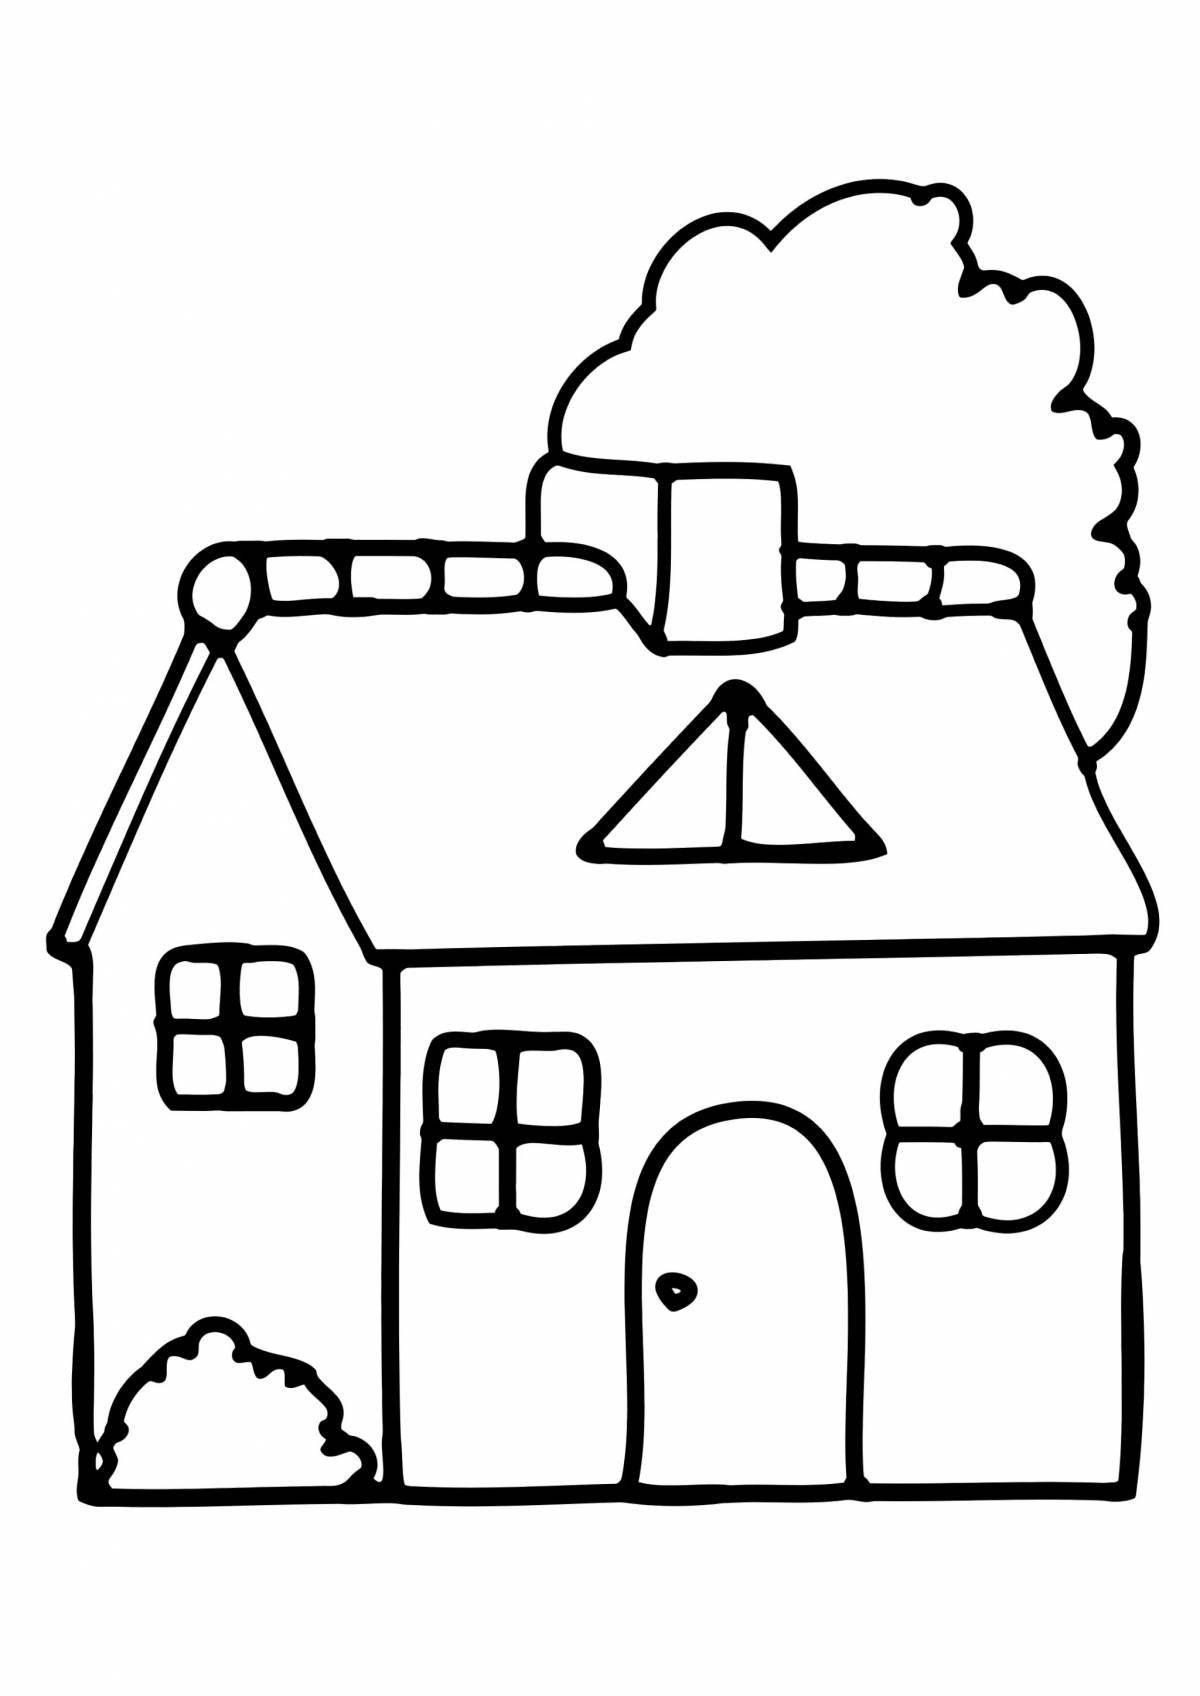 Coloring page amazing house for boys